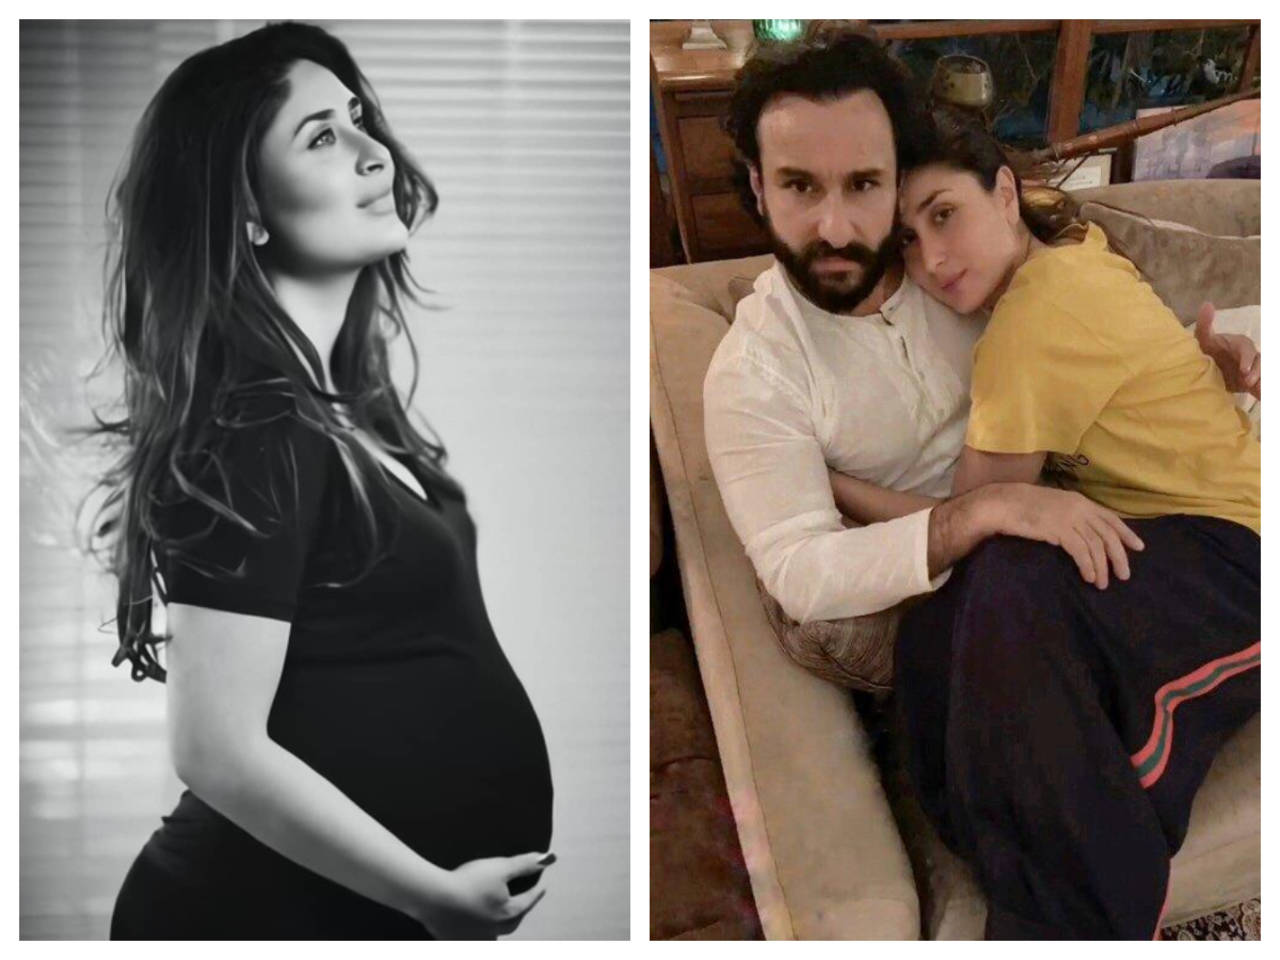 Kareena Kapoor Khan reveals she lost her sex drive during pregnancy, says  Saif Ali Khan has been understanding and supportive | Hindi Movie News -  Times of India